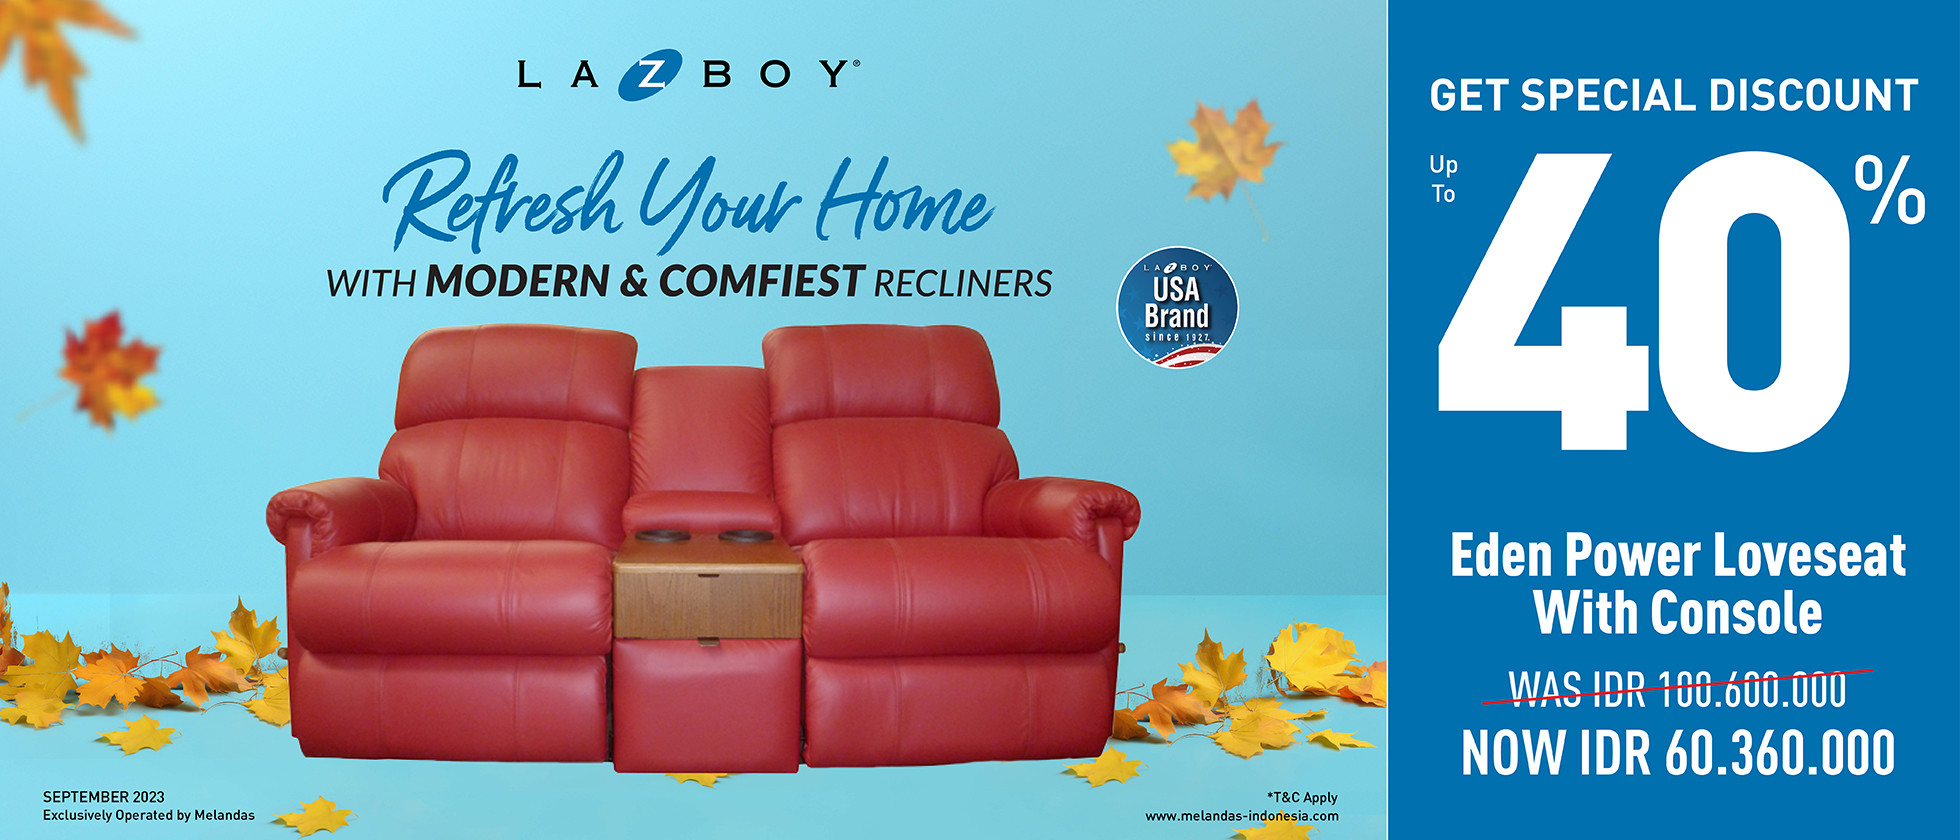 Refresh your Home With  Modern & Comfiest Recliners